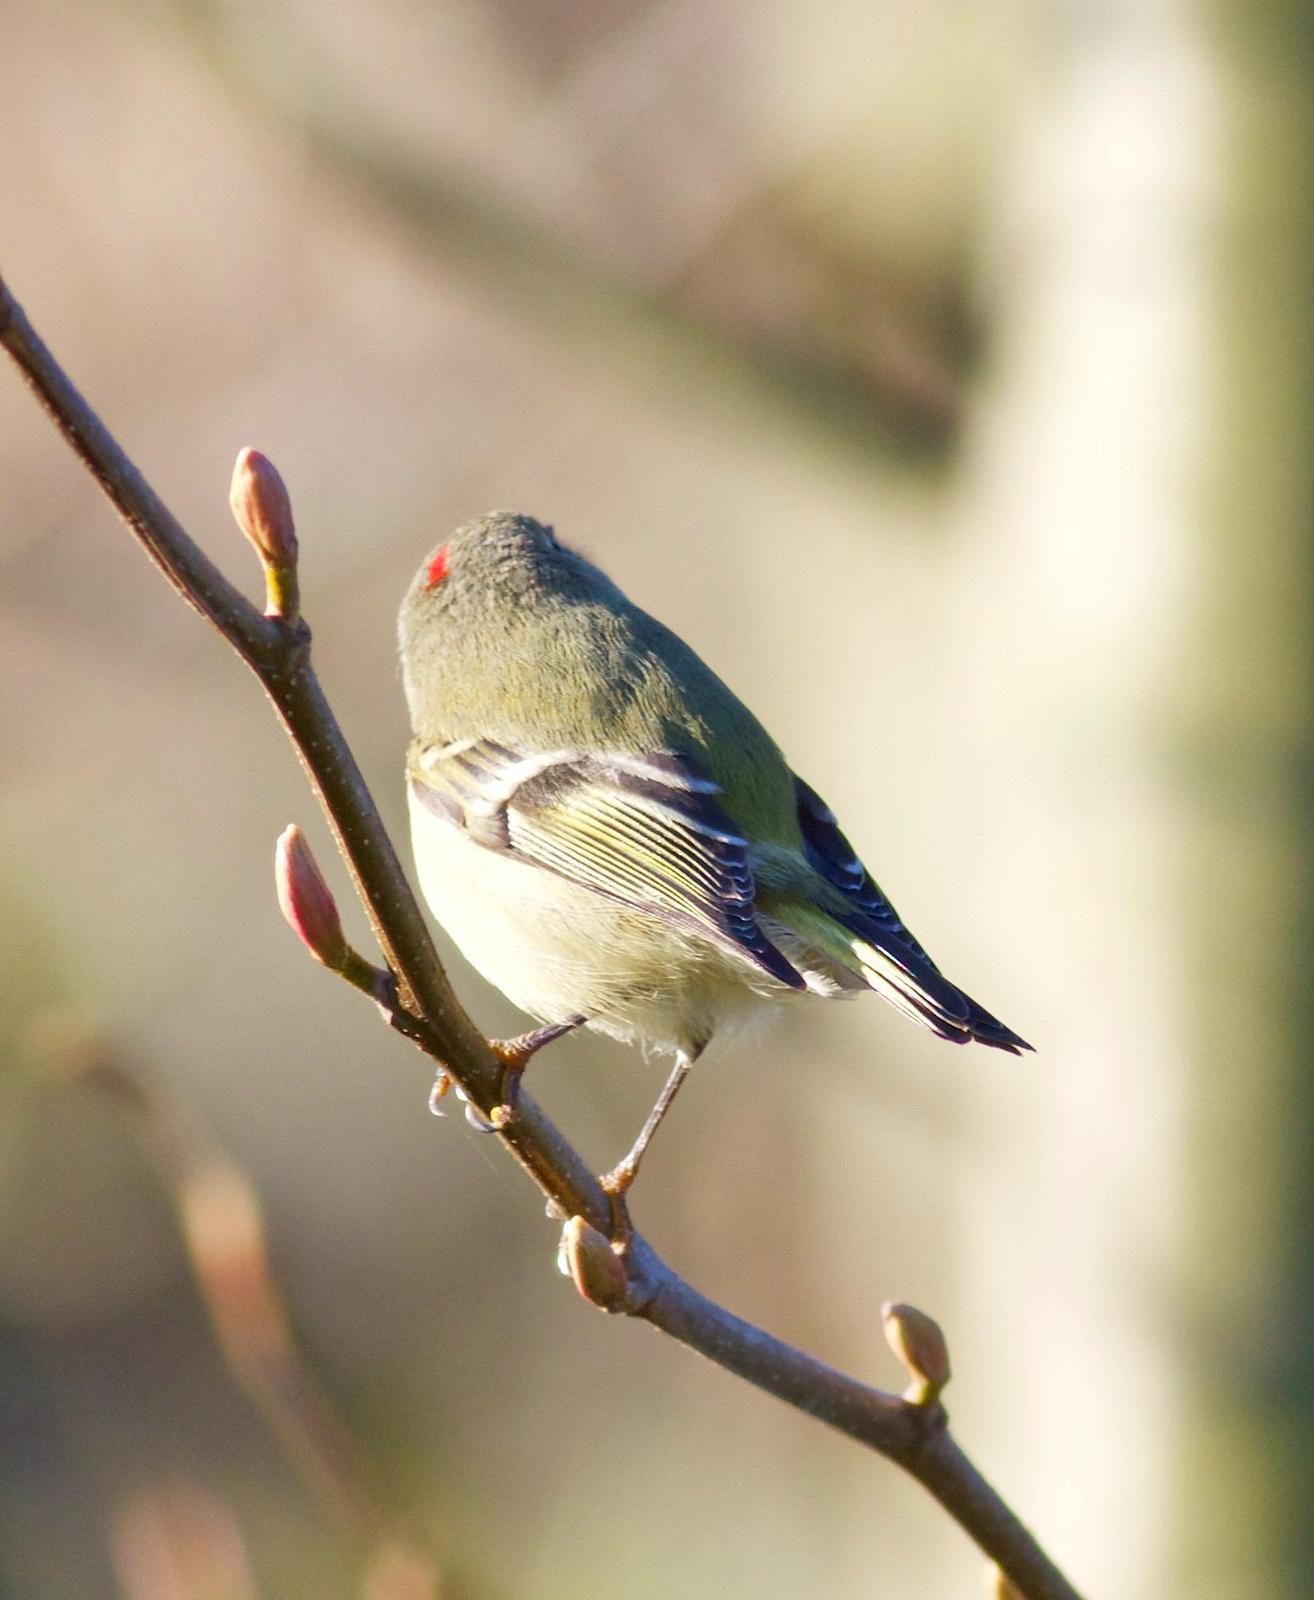 Ruby-crowned Kinglet Photo by Kathryn Keith